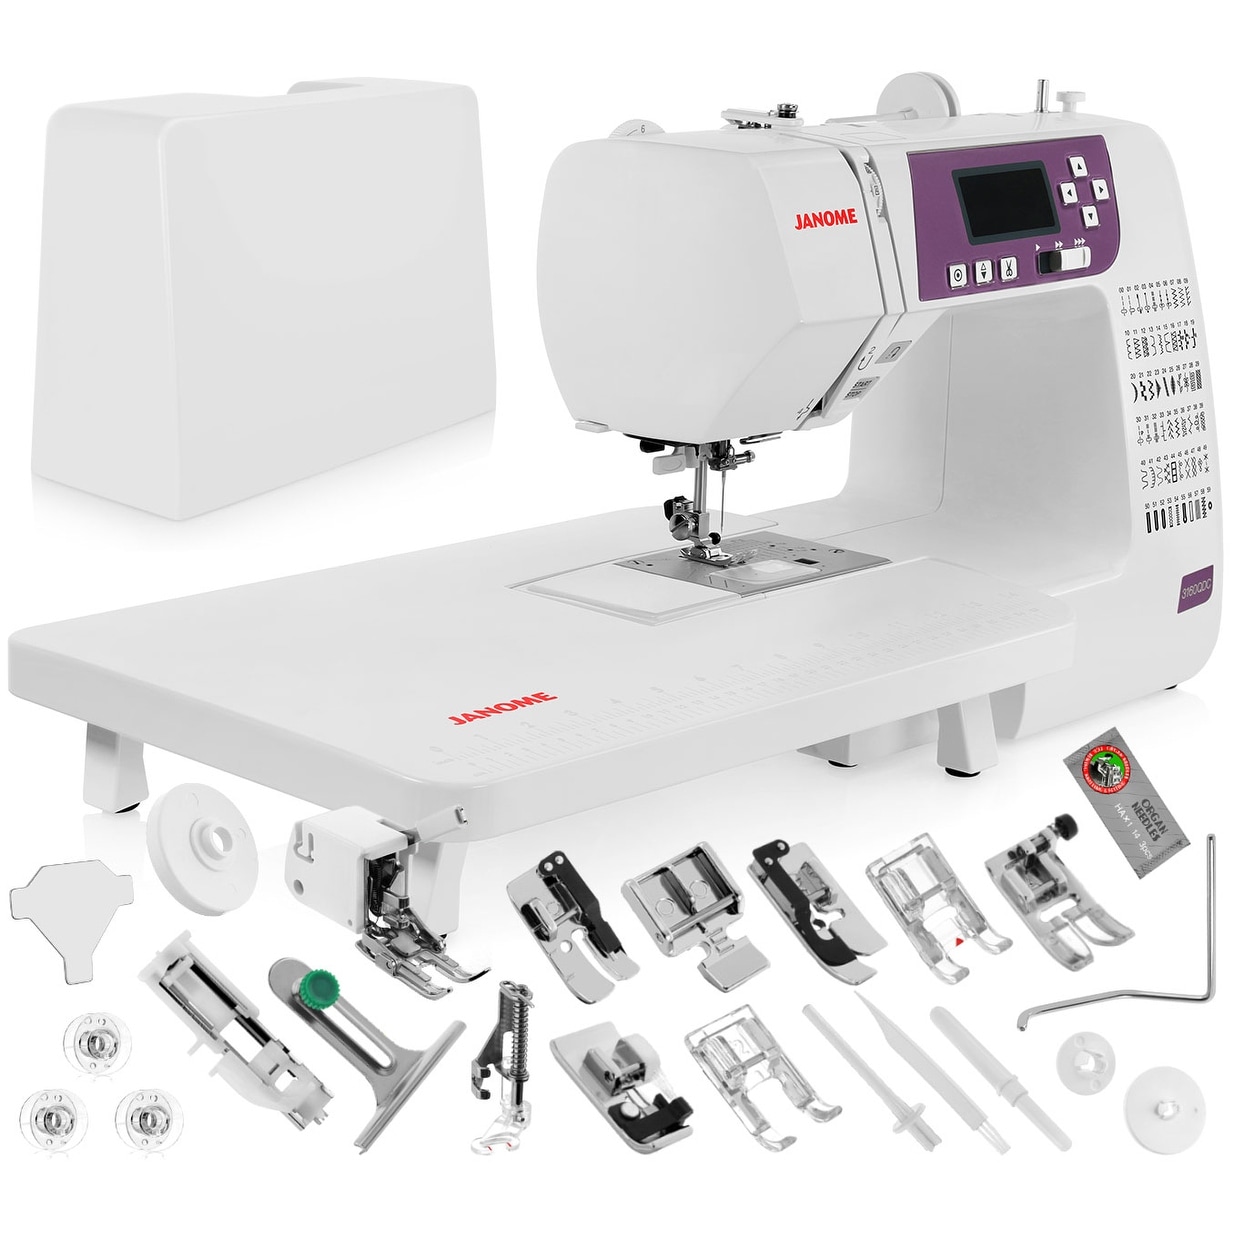 Brother LB5500 2-In-1 Sewing and Embroidery Machine with 135 Built-In  Designs 